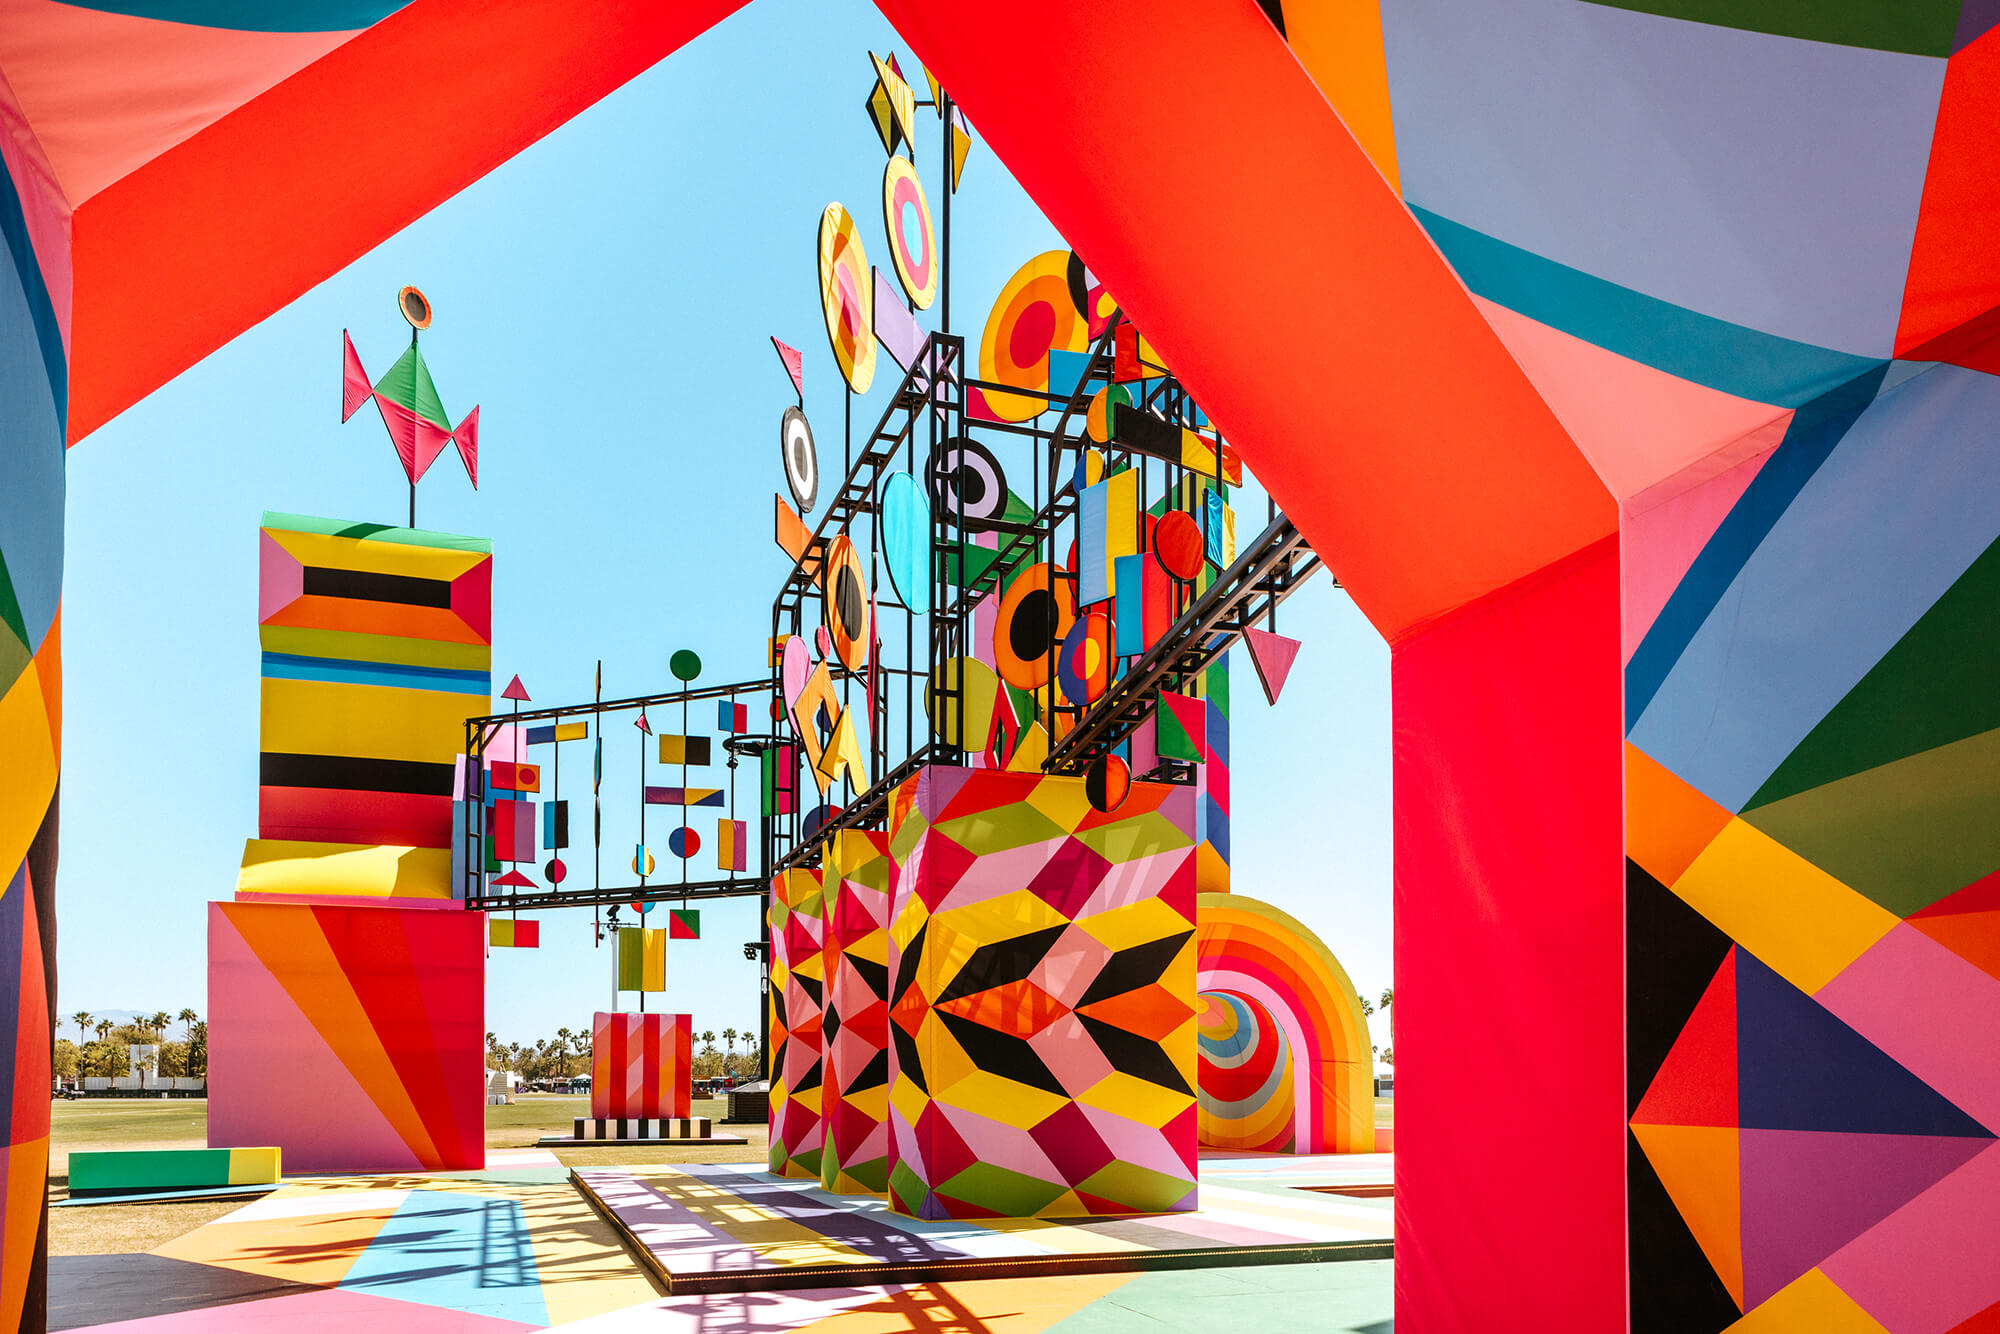 Dancing in the Sky by Morag Myerscough on view at Coachella